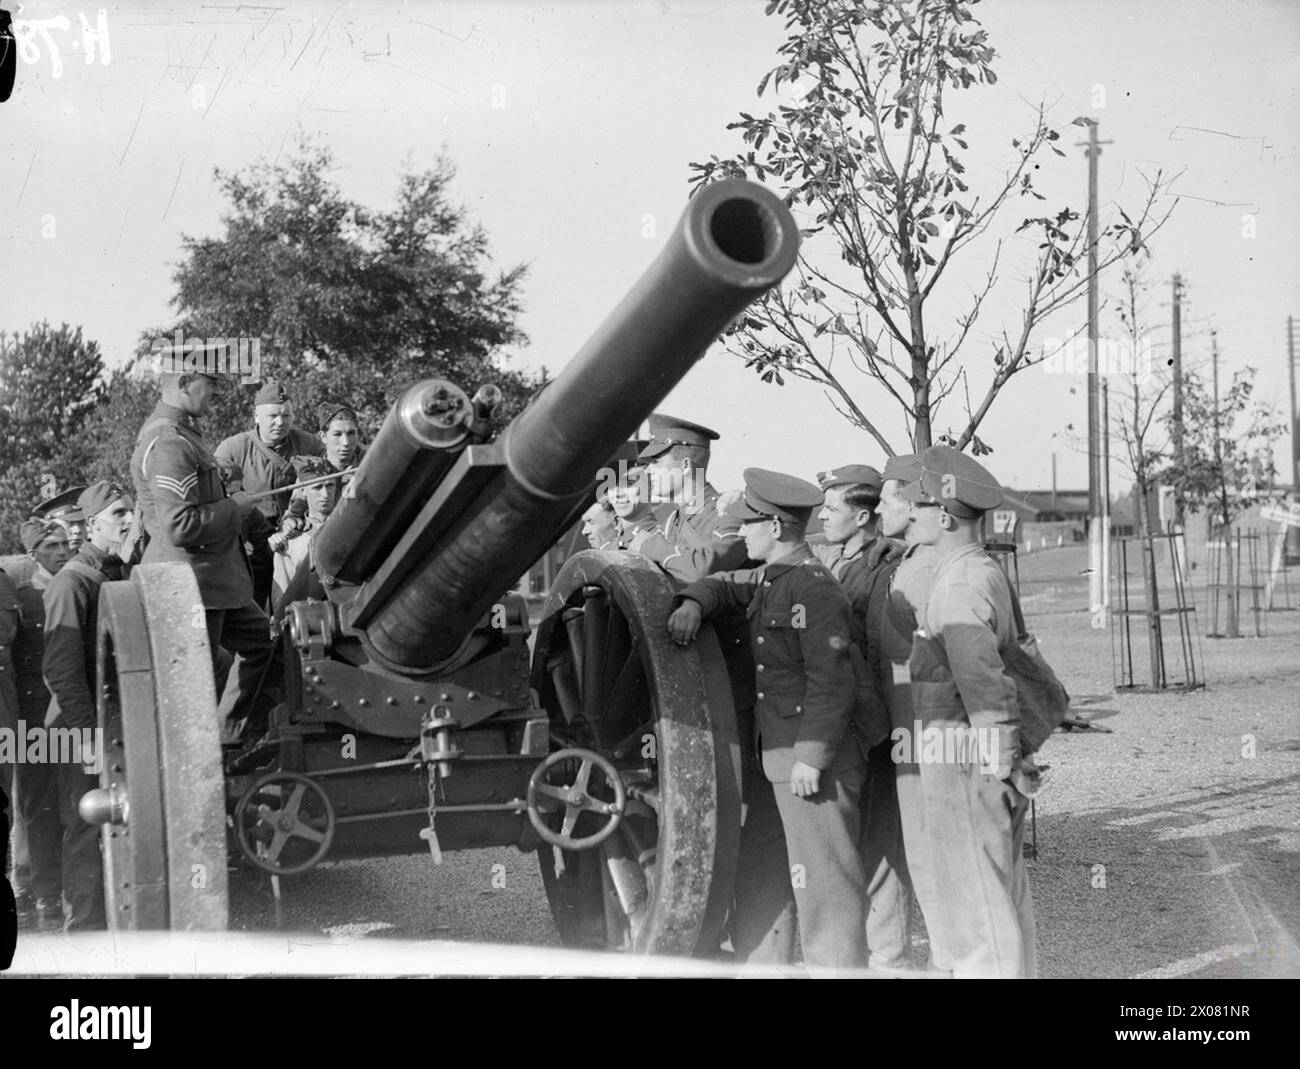 THE BRITISH ARMY IN THE UNITED KINGDOM 1939-45 - Royal Artillery recruits receiving instruction on the 60-pounder gun at the School of Artillery, Larkhill, November 1939  British Army, Royal Artillery Stock Photo